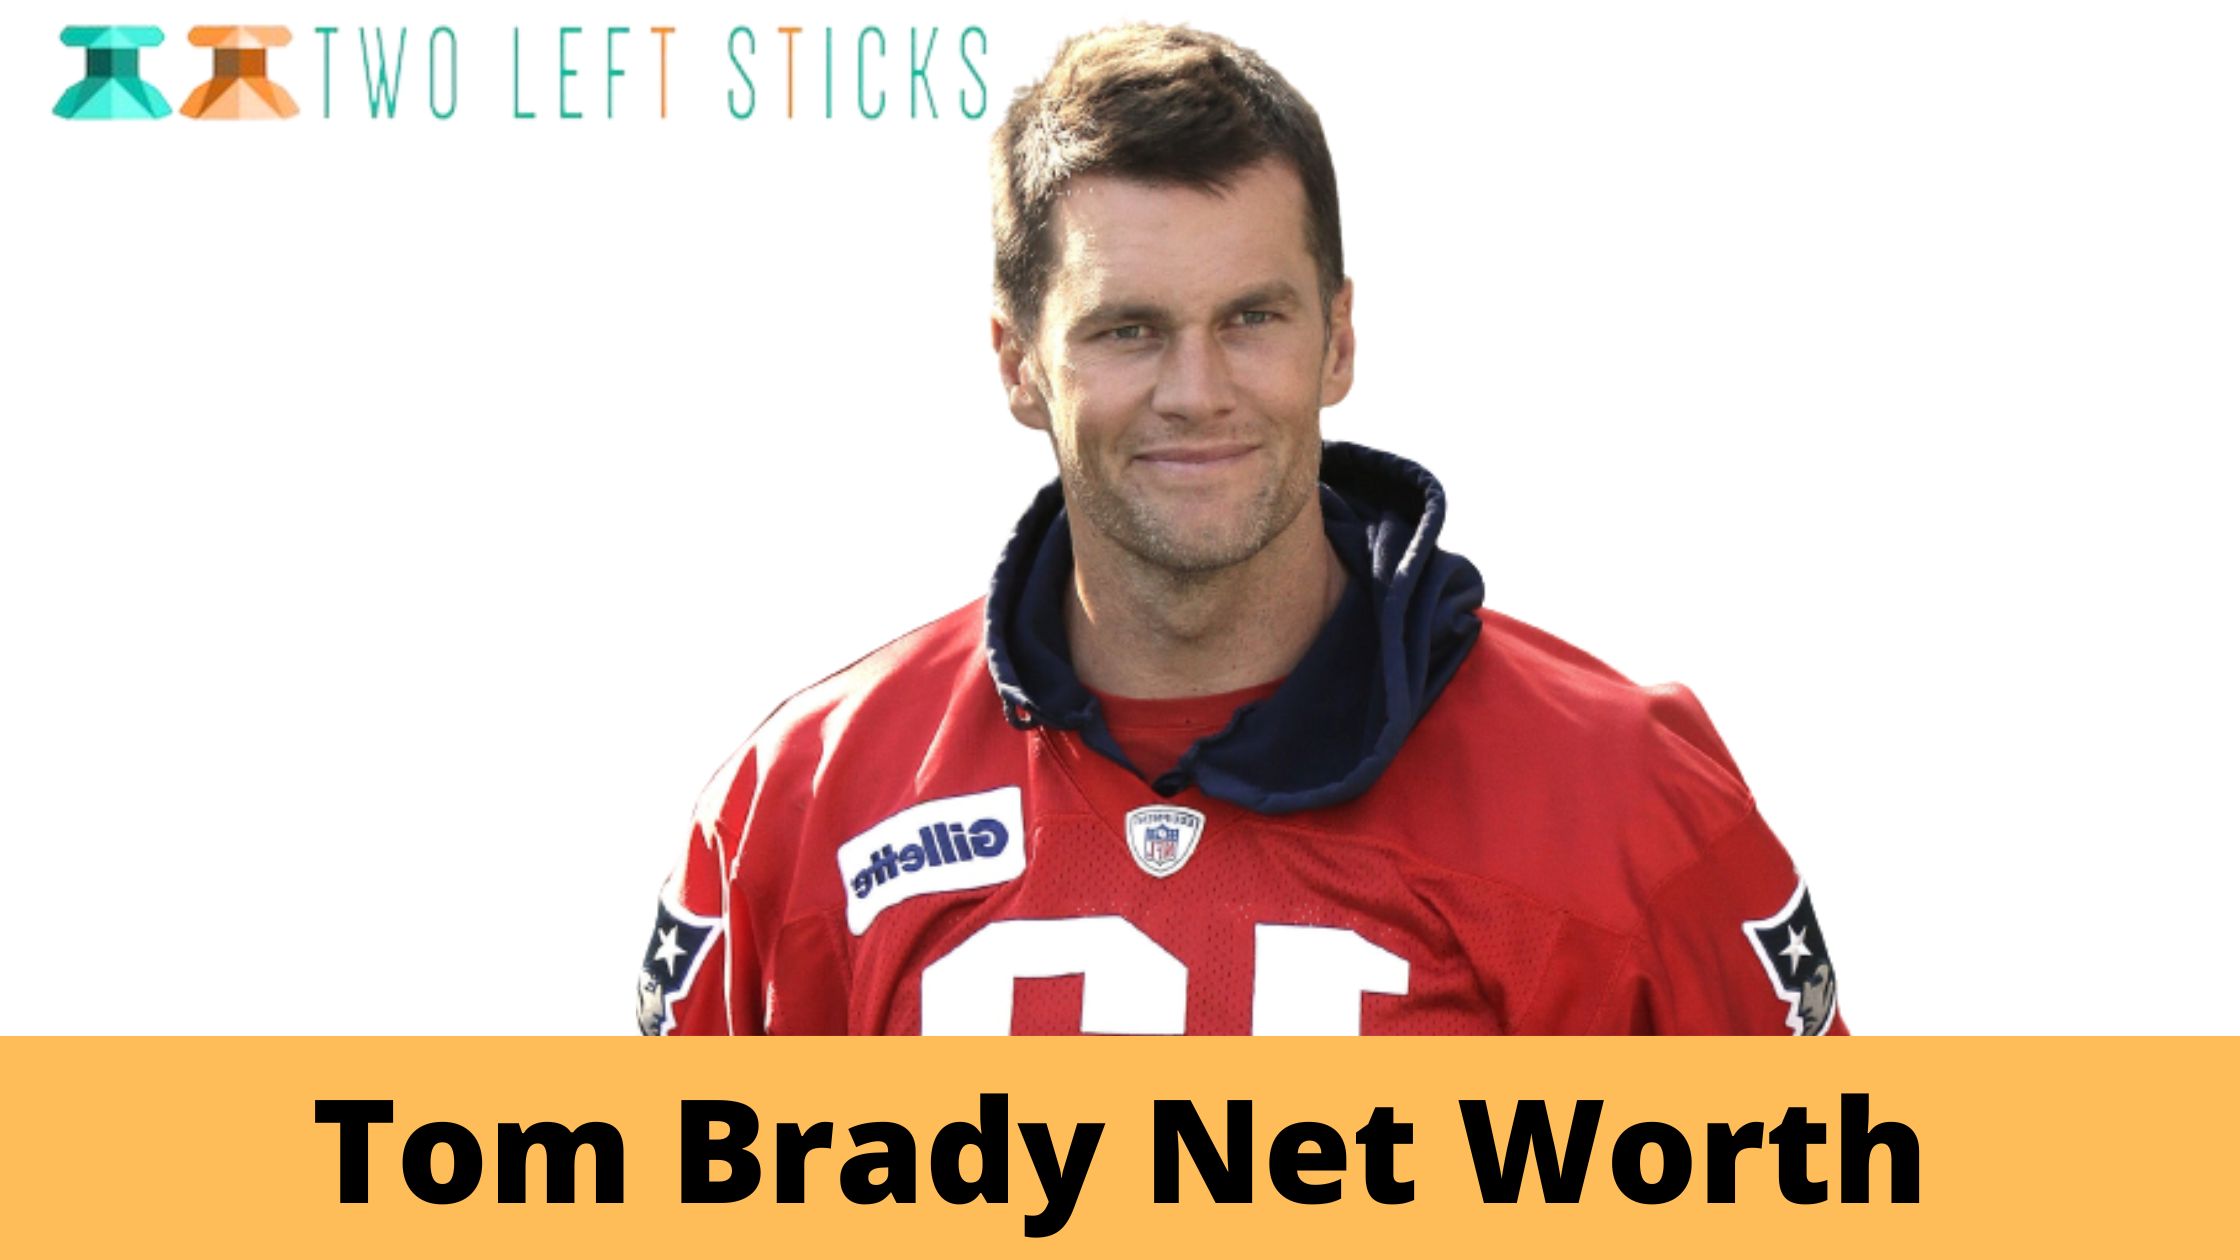 Tom Brady Net Worth- The Best QB to Ever Play in the NFL?